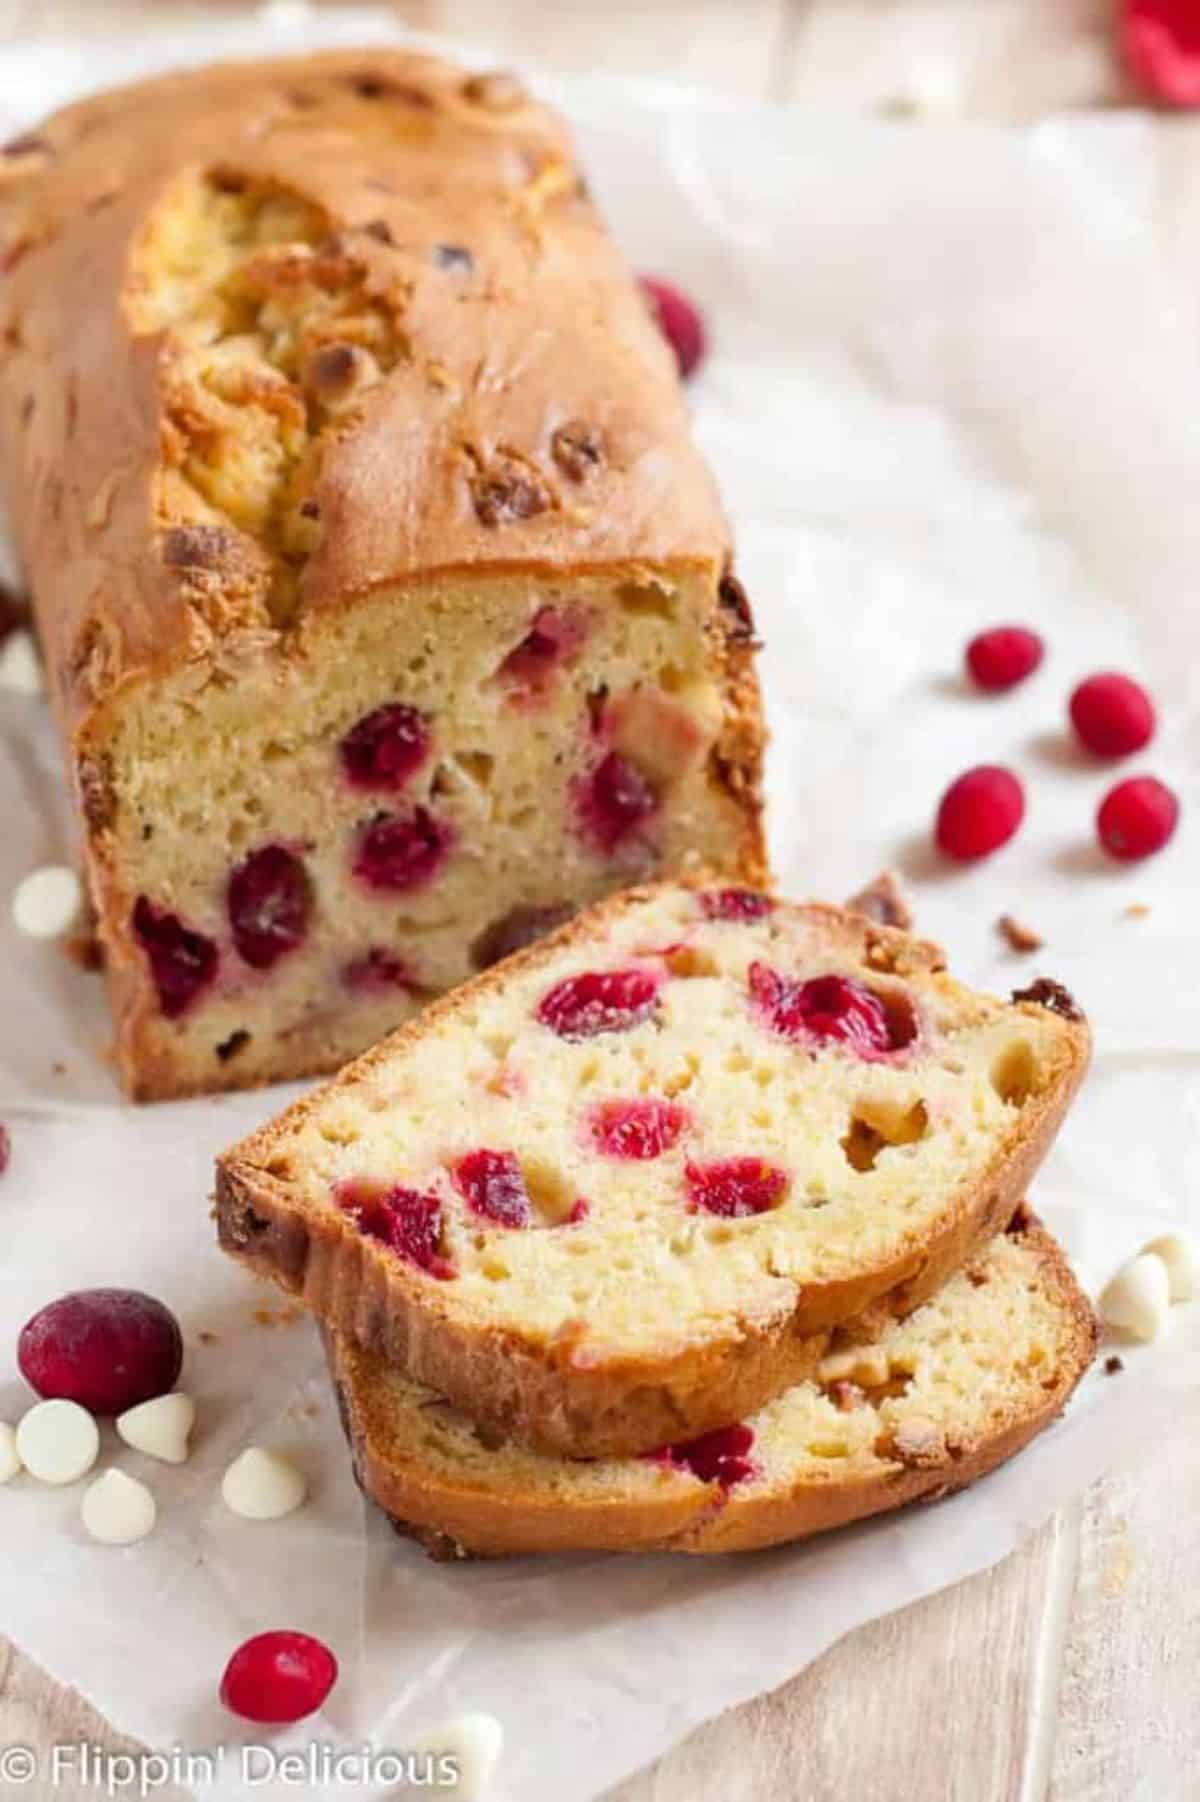 Partially sliced Gluten-Free Cranberry Bread on a table.